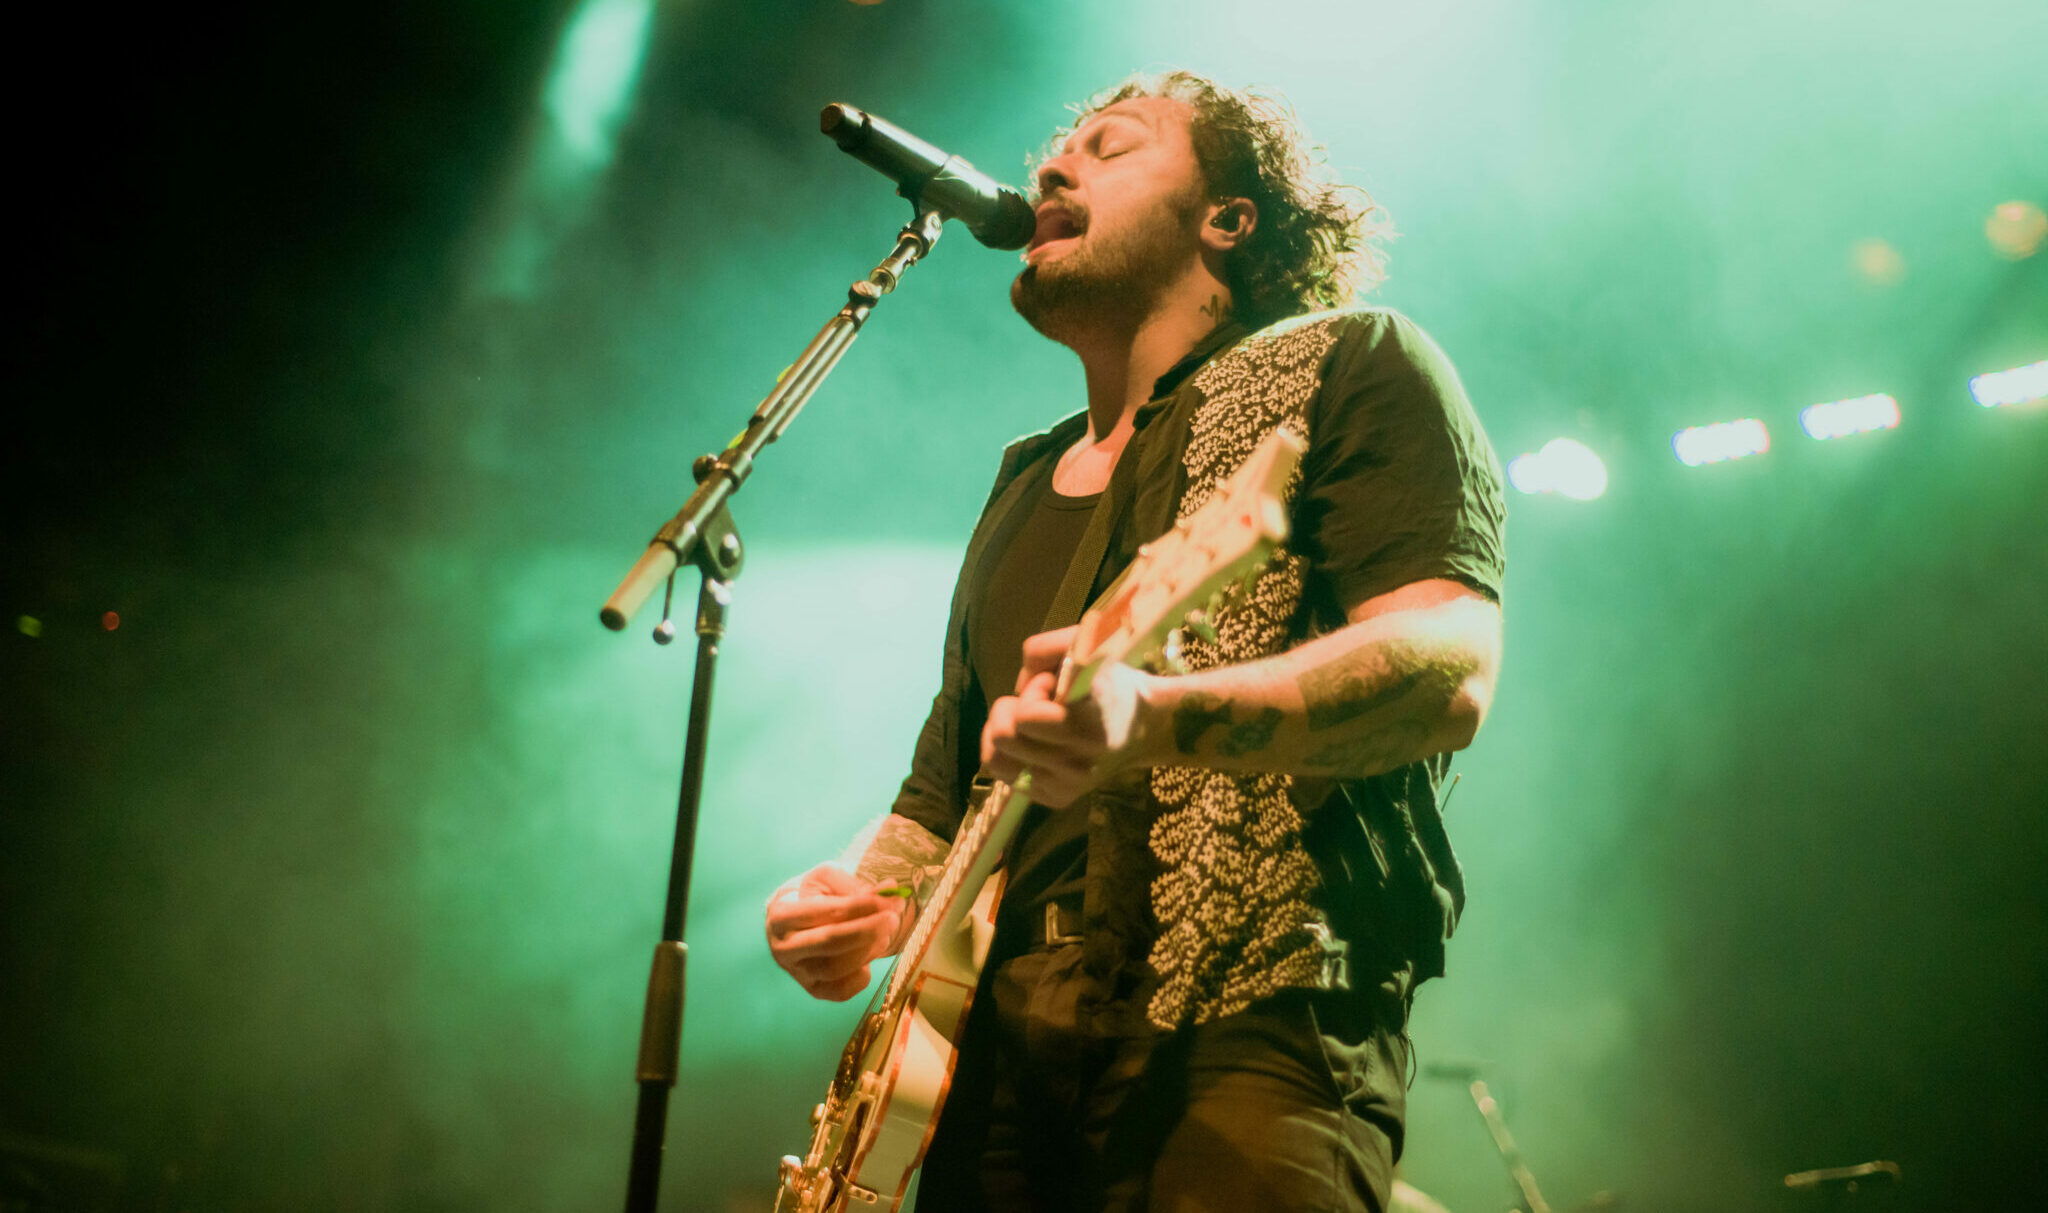 Gang of Youths performing at Danforth Music Hall in Toronto